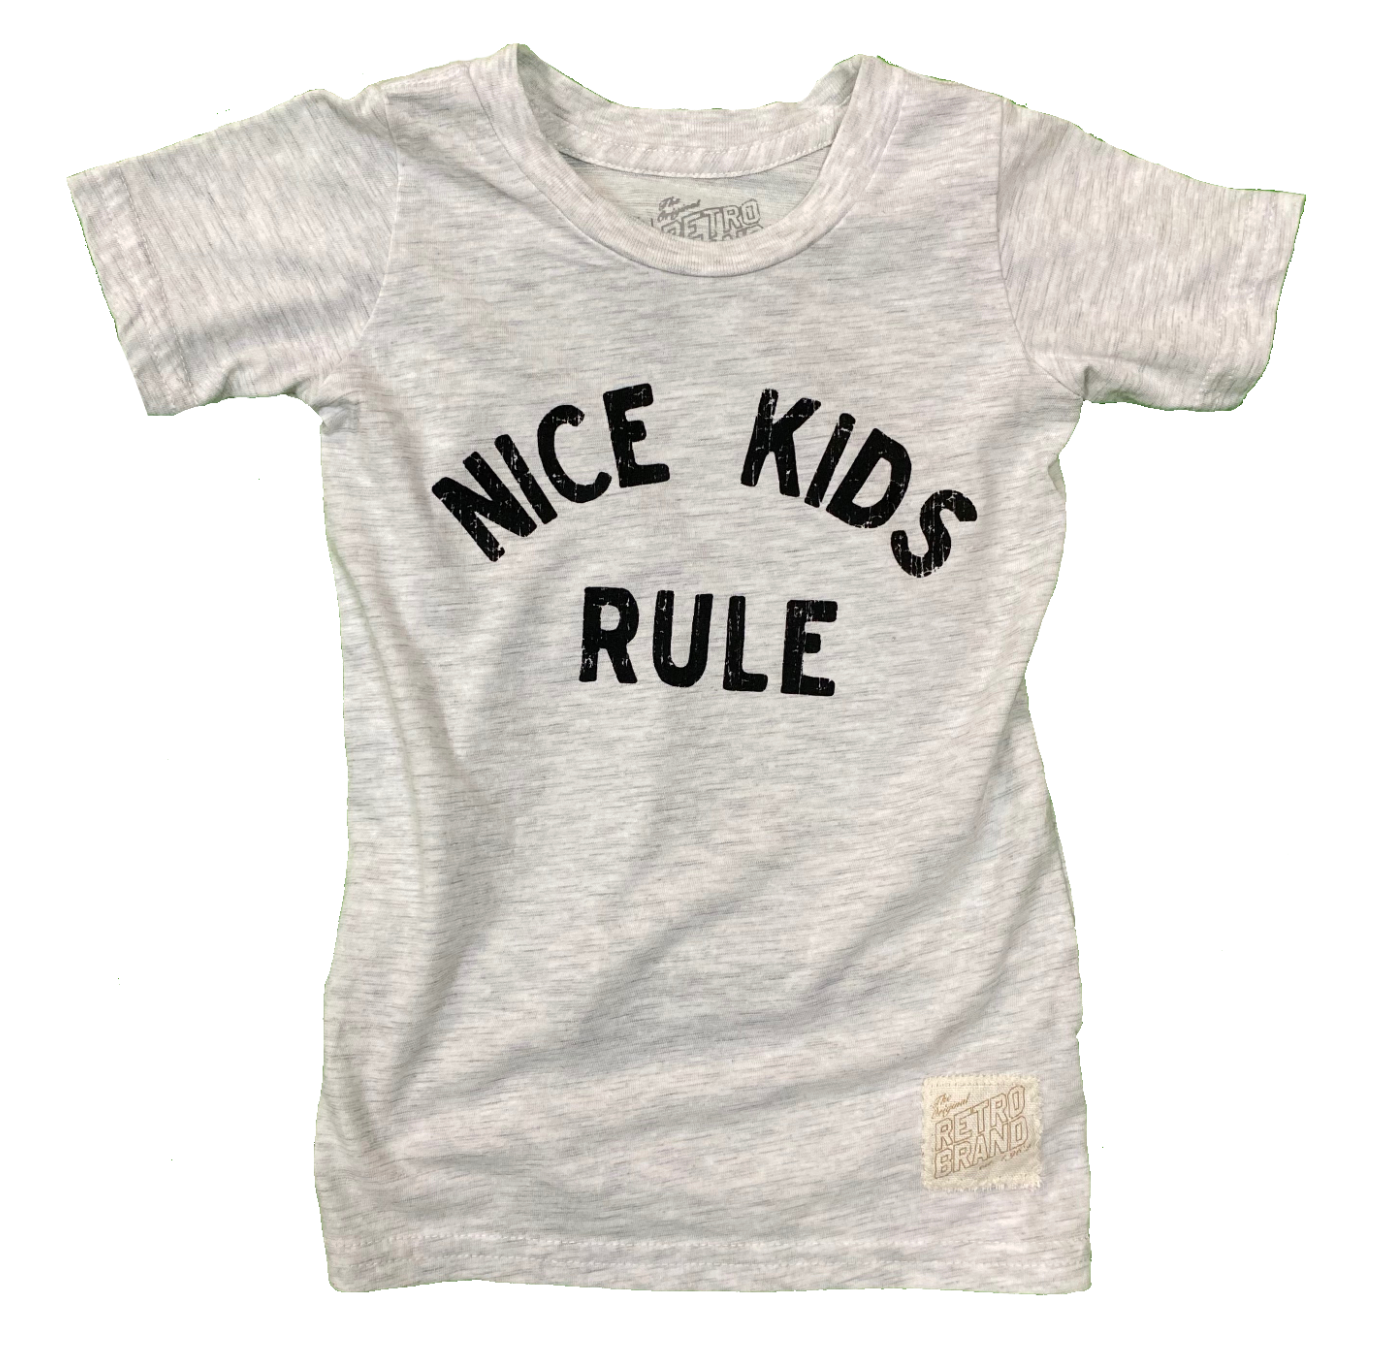 Nice Kids Rule Tri-Blend Tee (Toddler/Youth) - 2T